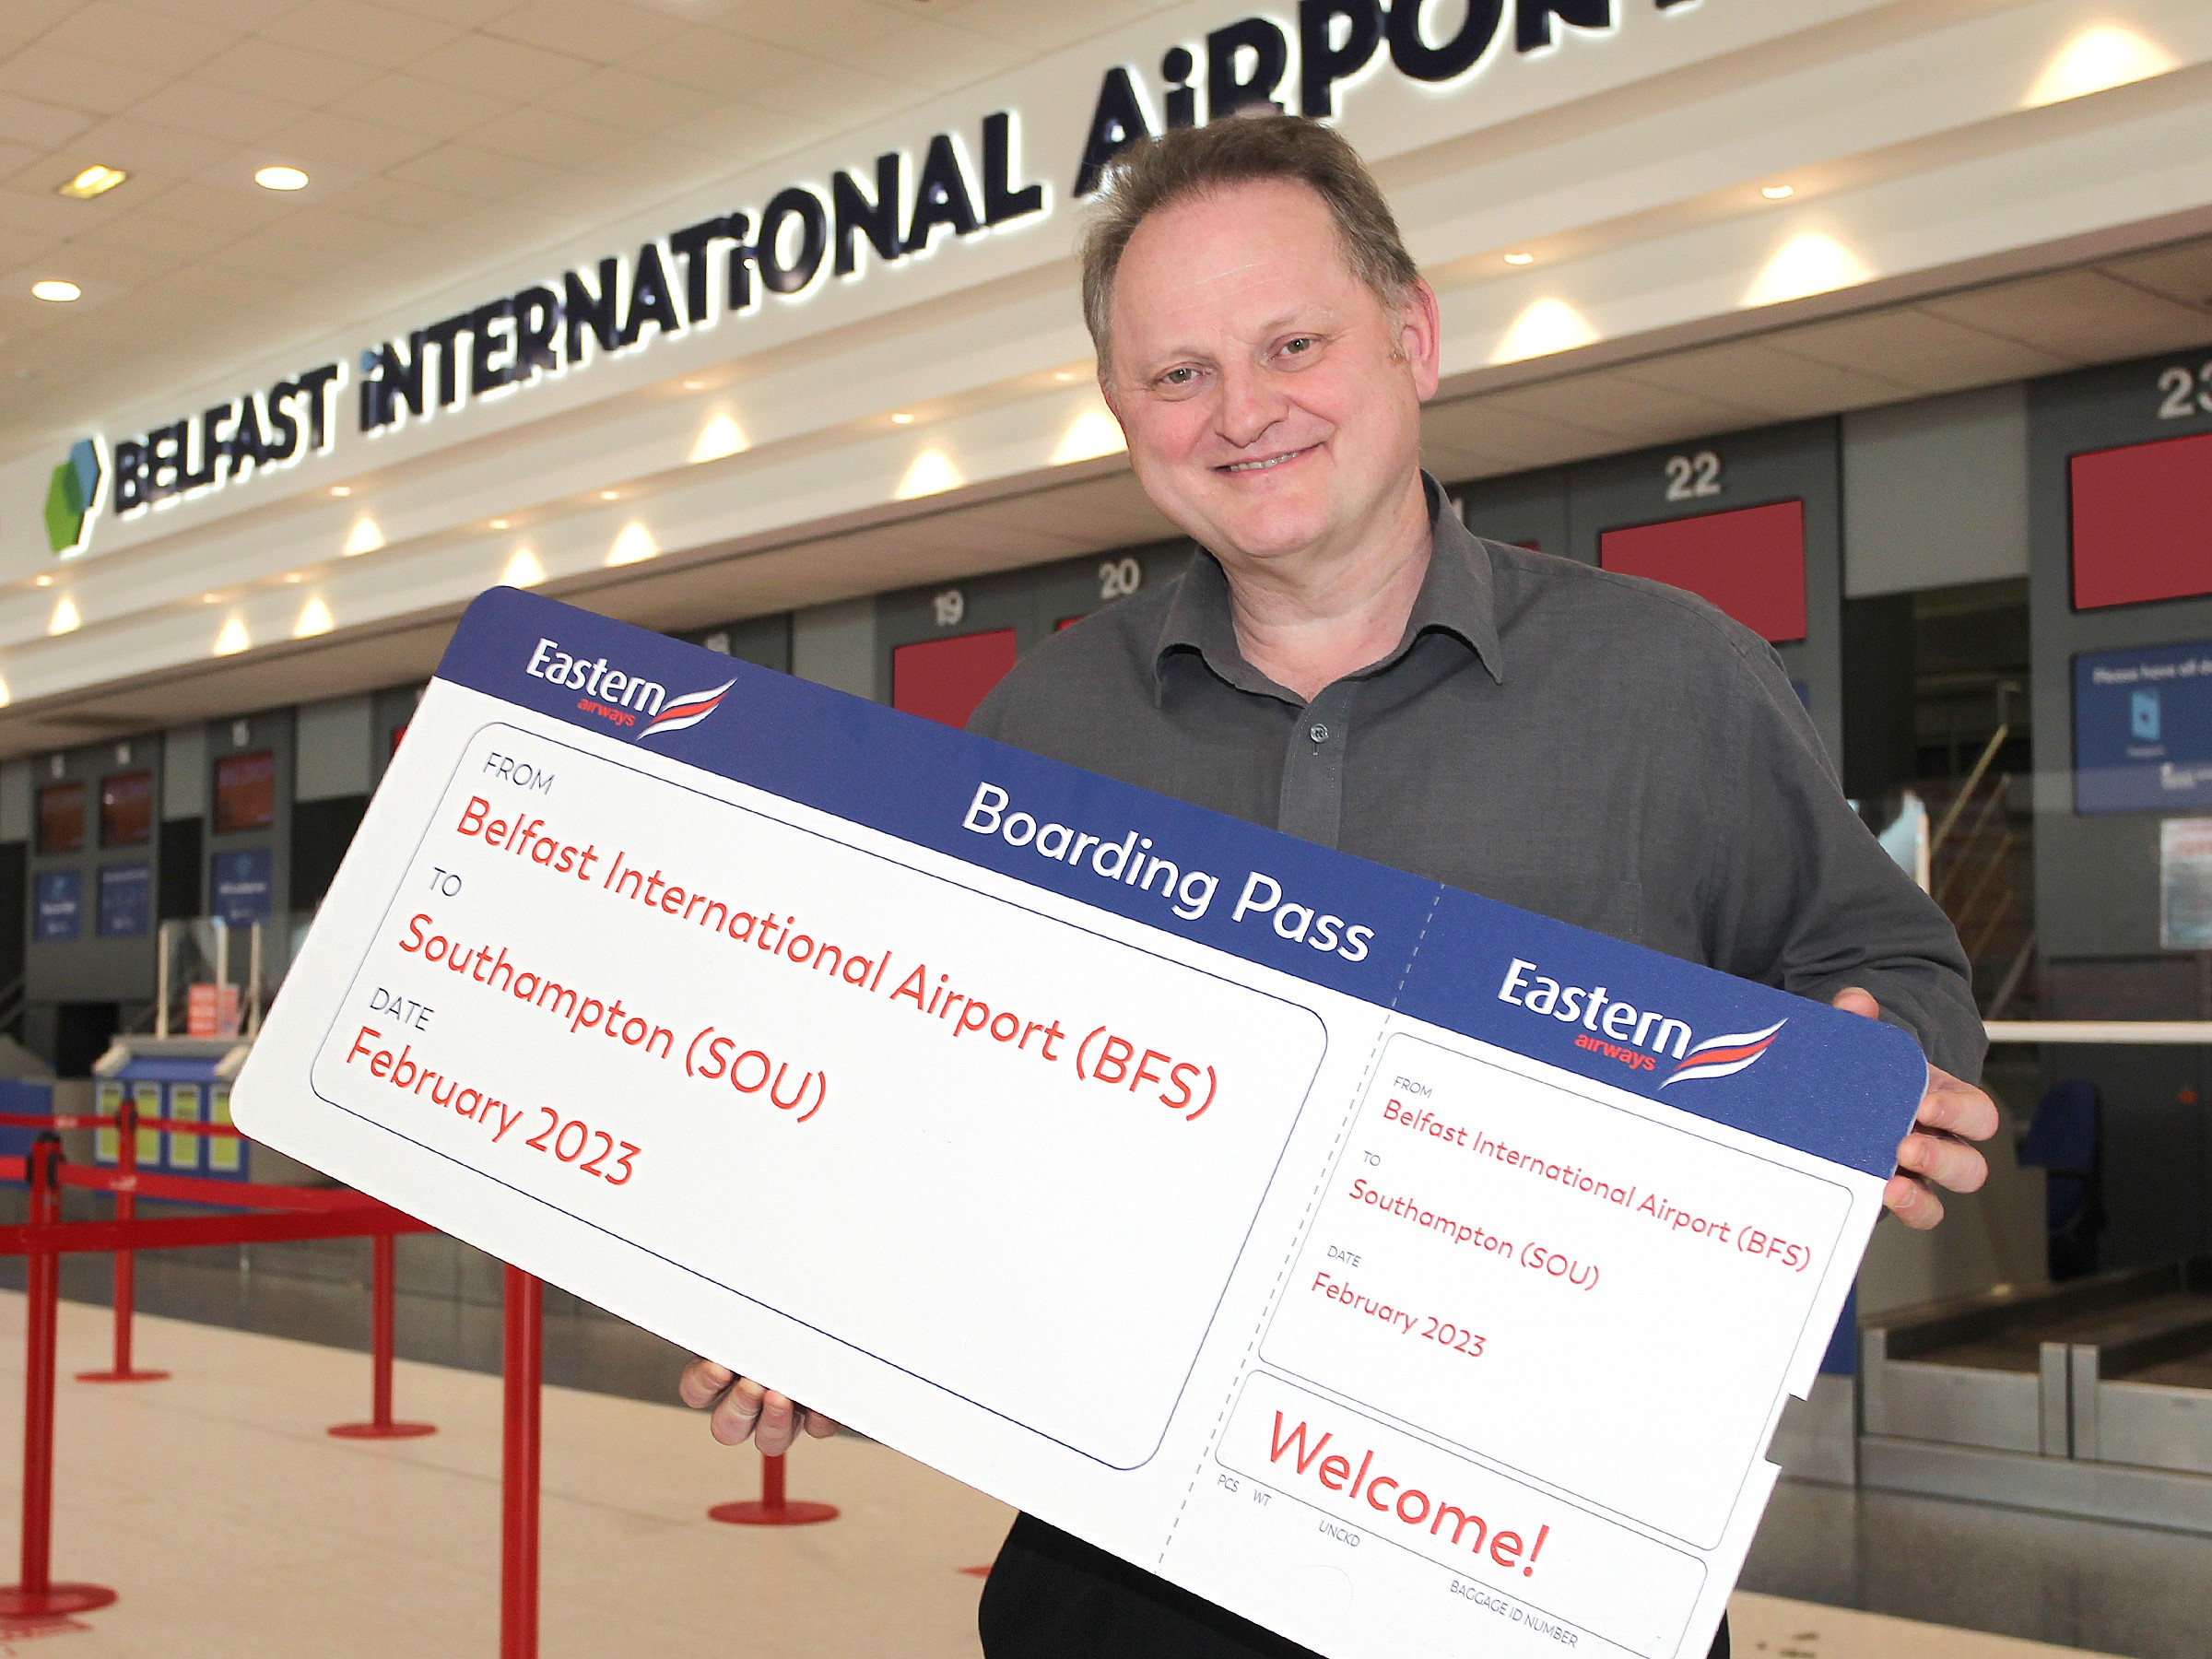 Belfast International Airport welcomes Eastern Airways with new route to Southampton